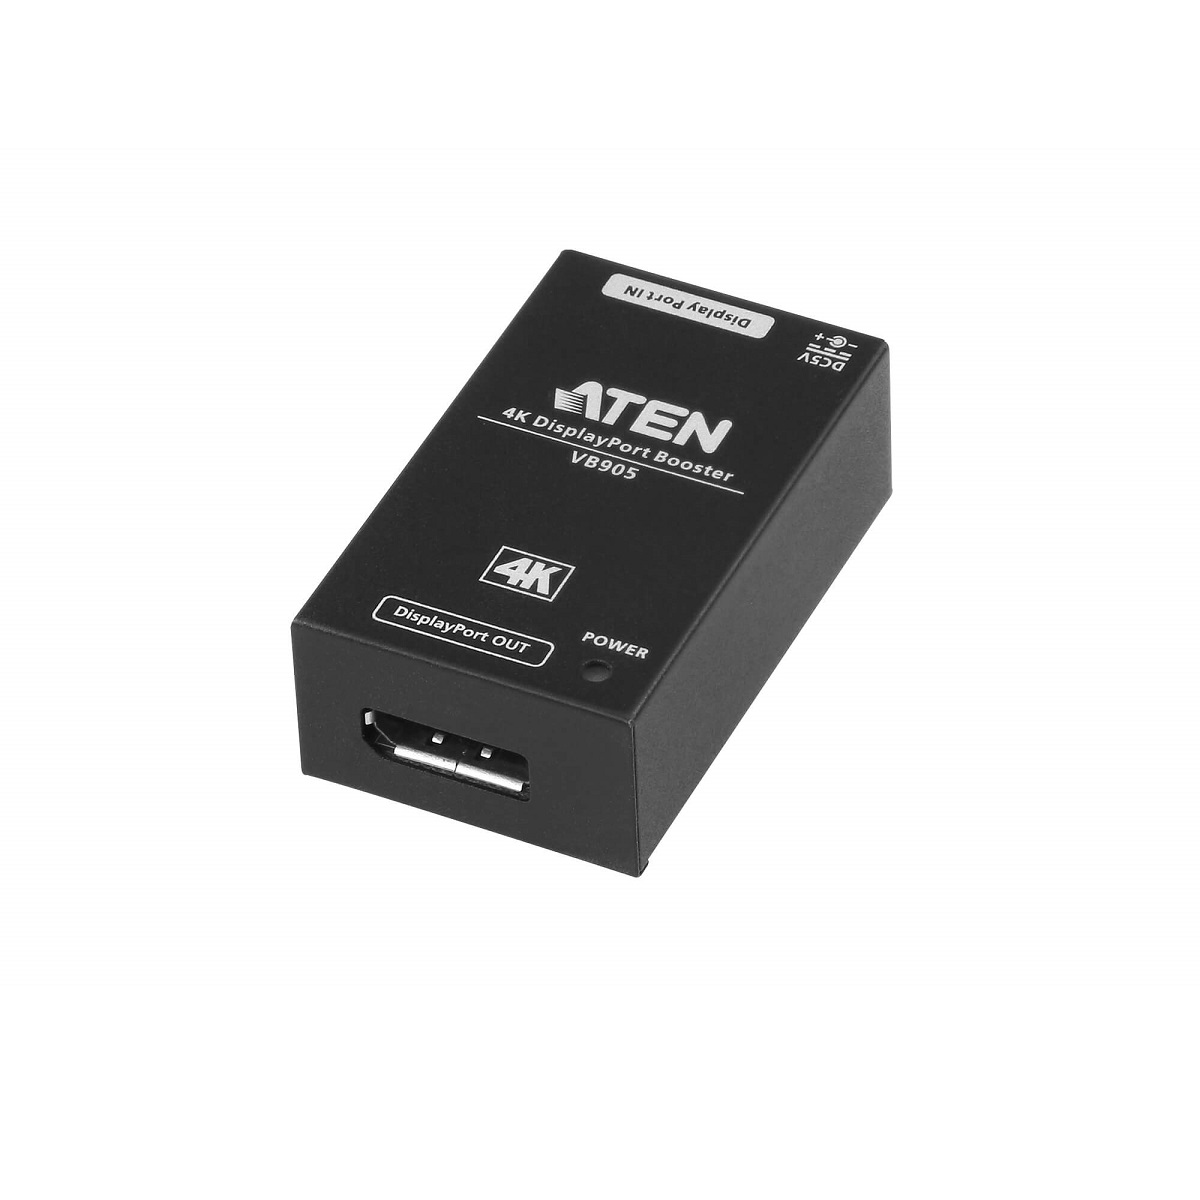 Aten DisplayPort 1.2 Booster up to 4K @ 60 Hz, support up to 5M from source to device, and 5m from device to display, cascadable to 3 levels